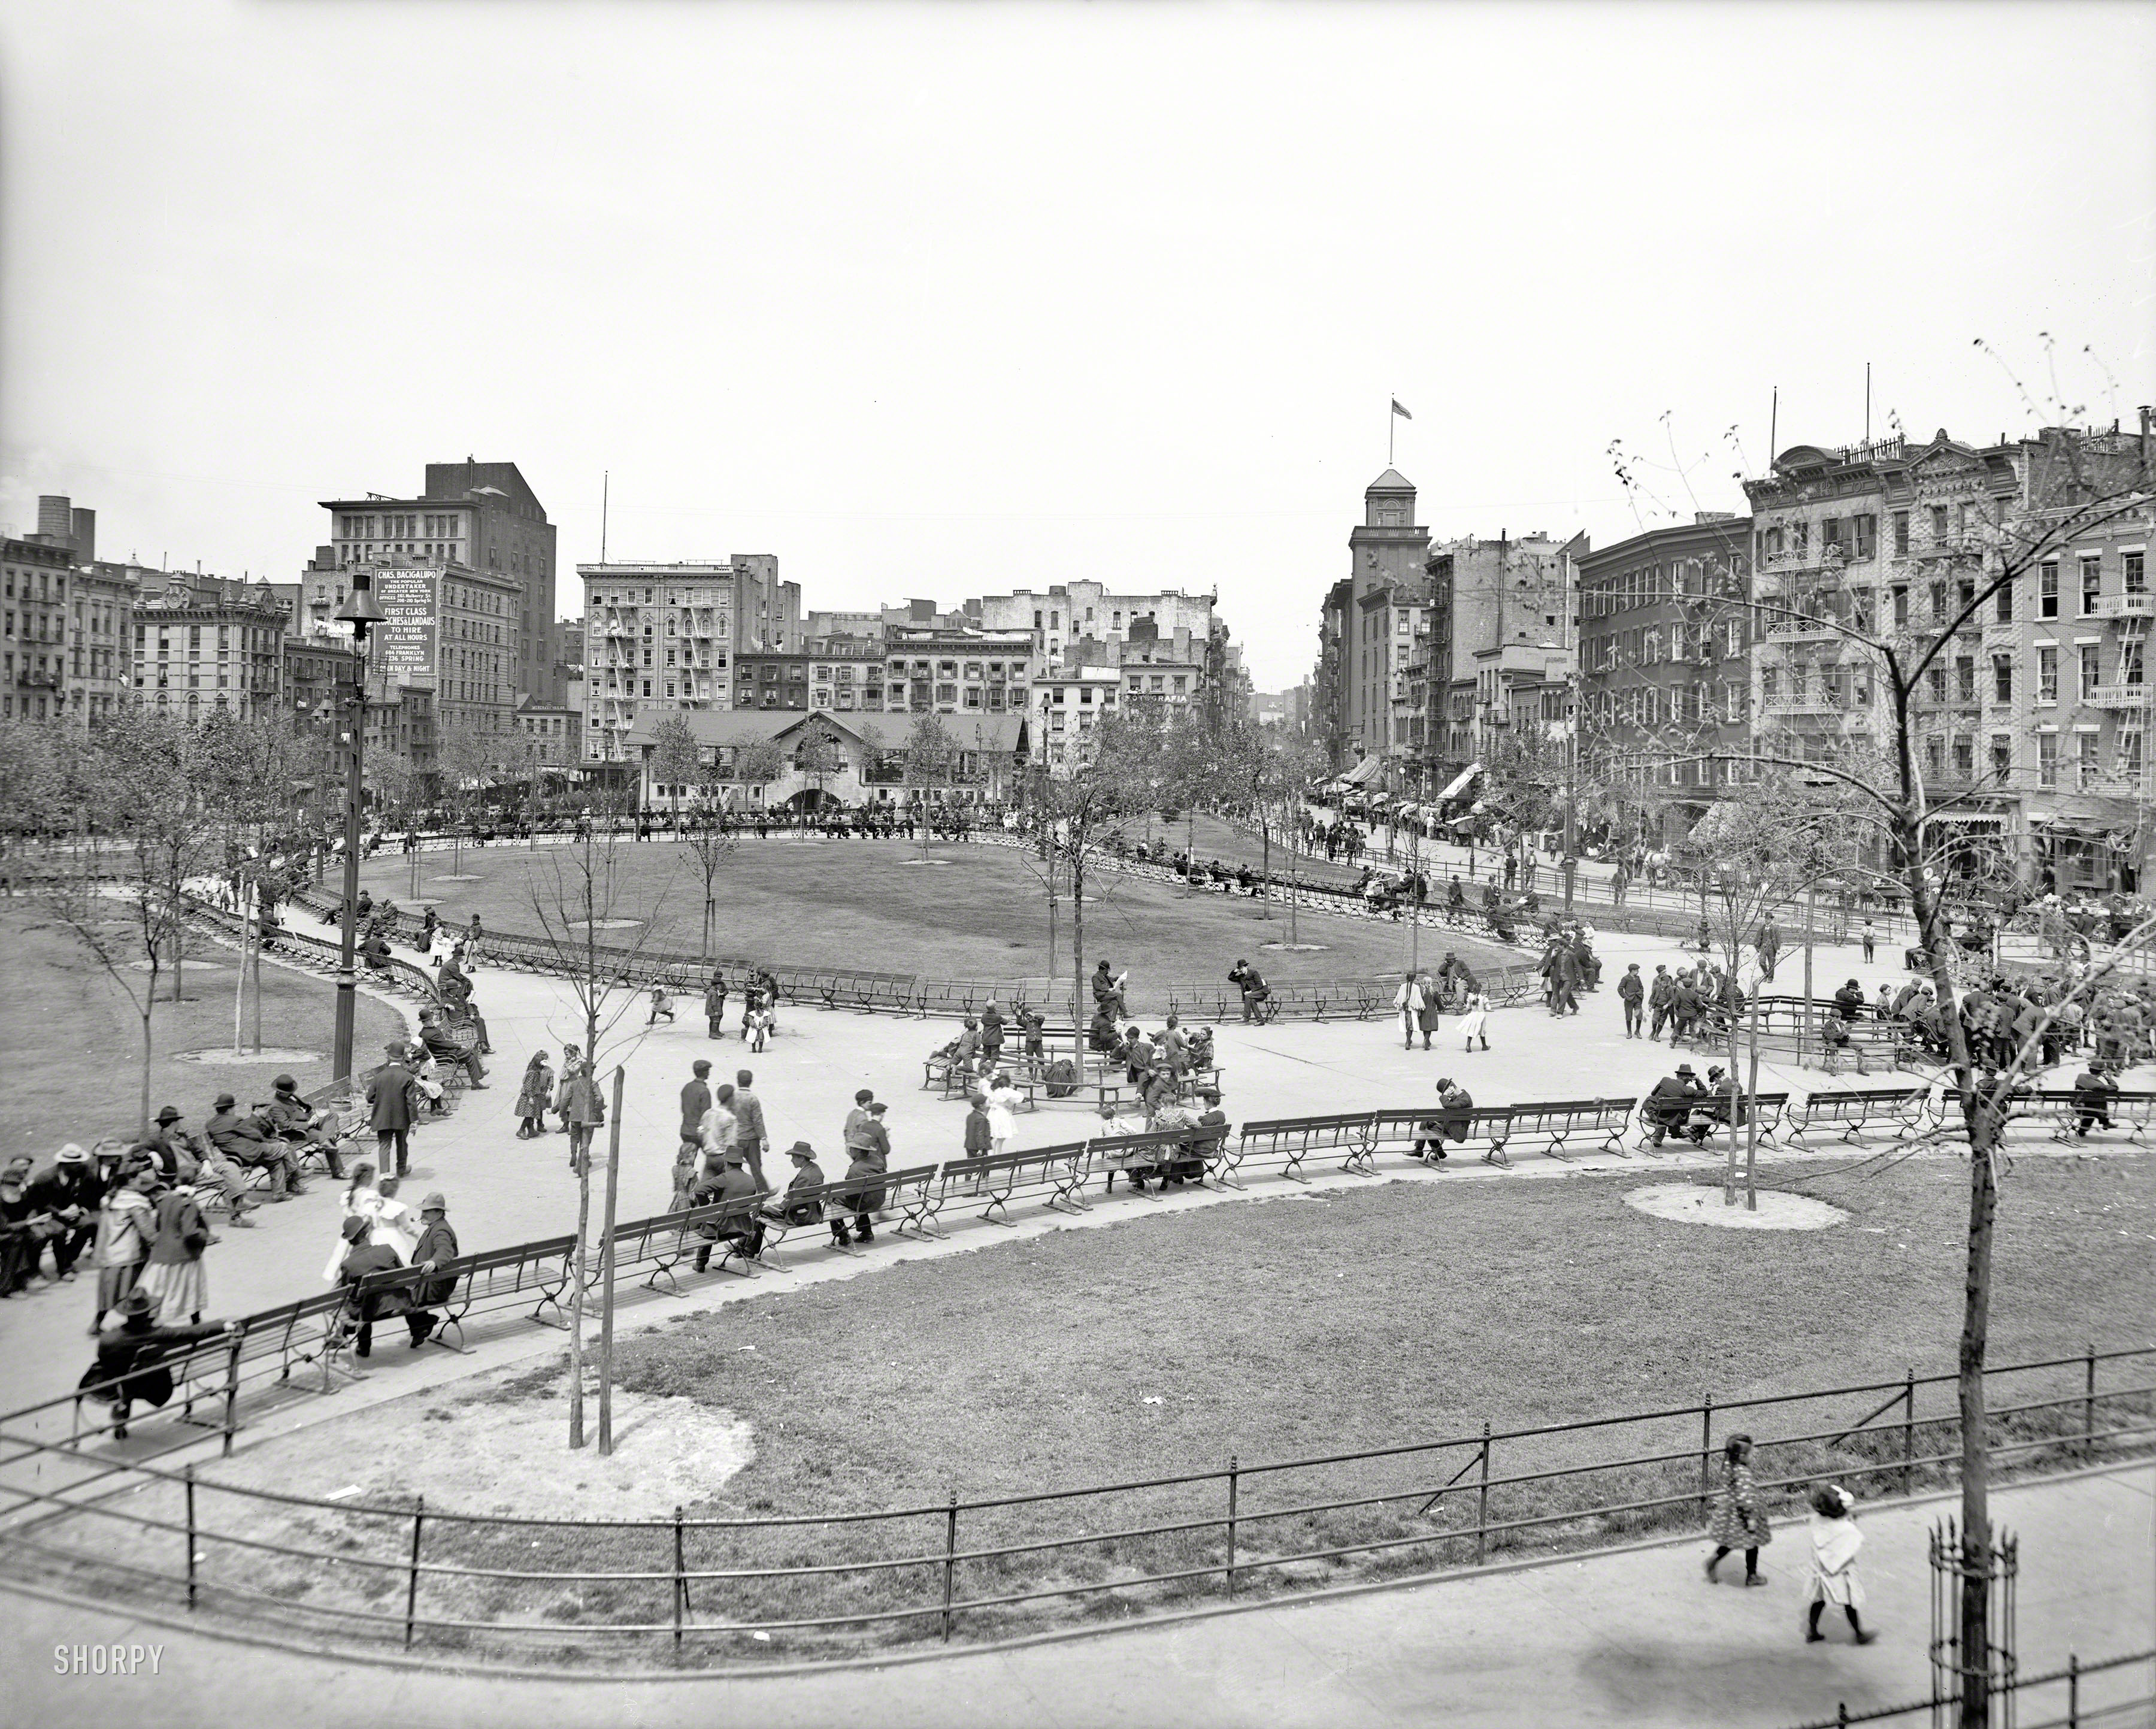 Circa 1905. "Mulberry Bend, New York City." The name was changed to Columbus Park in 1911. 8x10 glass negative, Detroit Publishing Co. View full size.